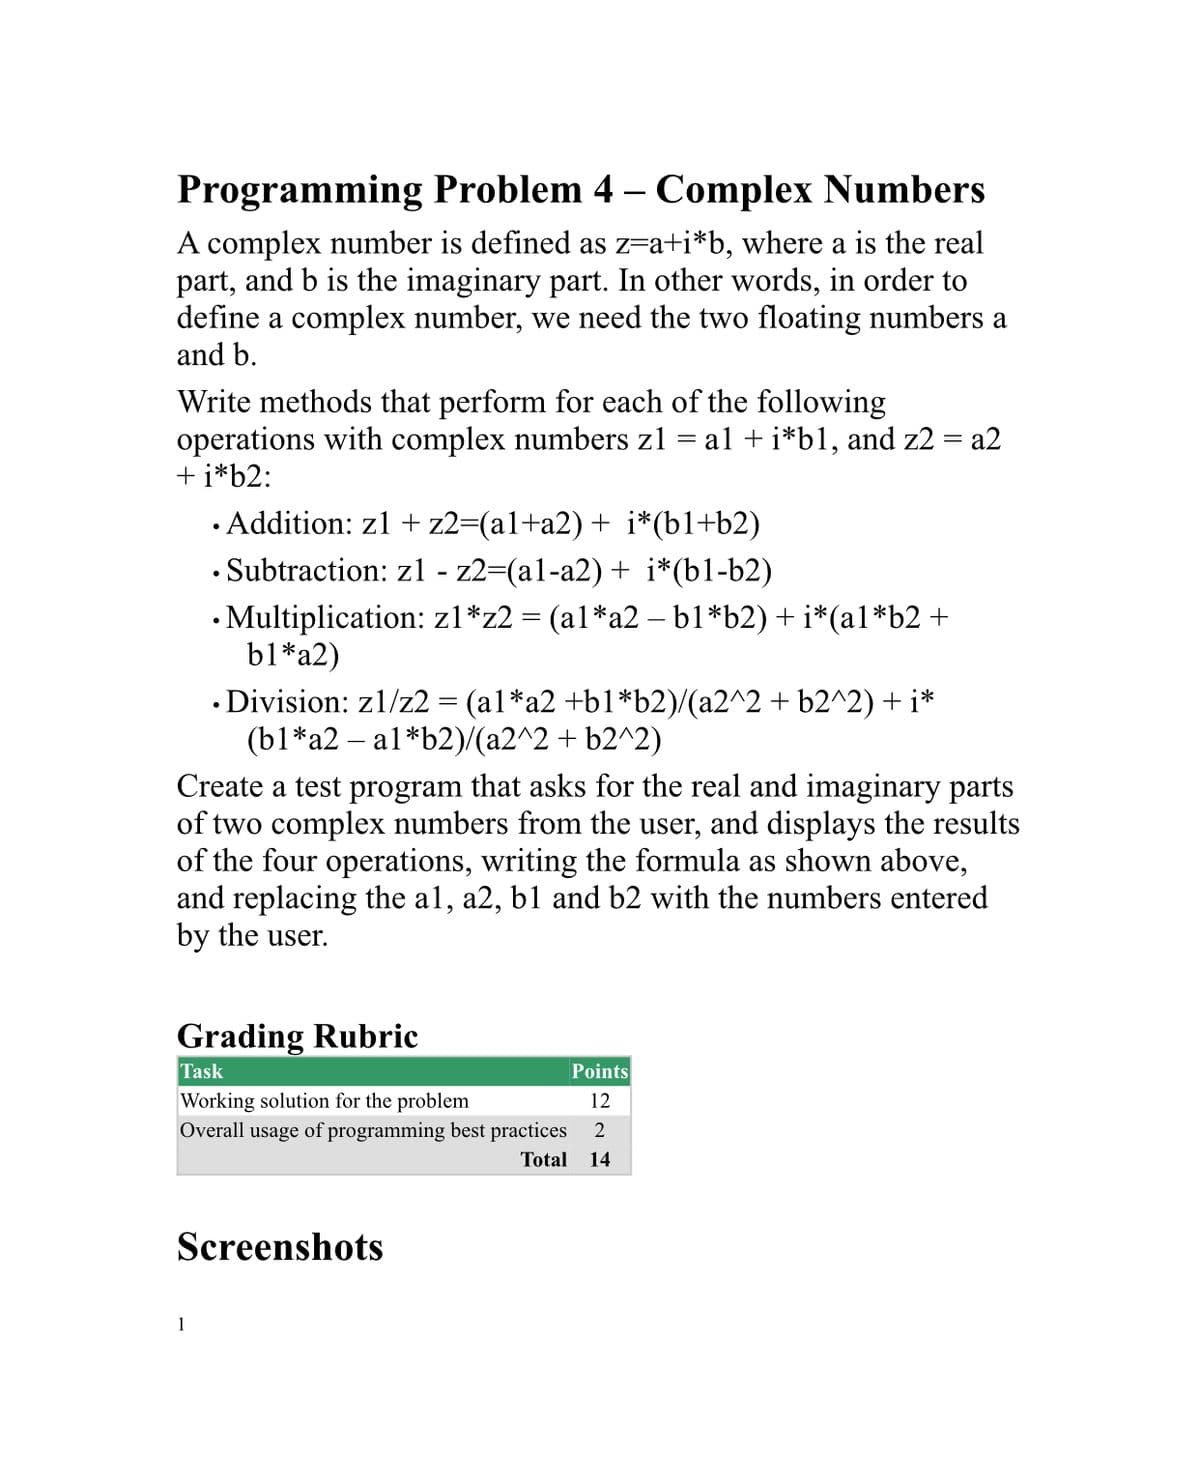 Programming Problem 4 – Complex Numbers
A complex number is defined as z=a+i*b, where a is the real
part, and b is the imaginary part. In other words, in order to
define a complex number, we need the two floating numbers a
and b.
Write methods that perform for each of the following
operations with complex numbers zl = al + i*b1, and z2 = a2
+ i*b2:
· Addition: z1 + z2=(al+a2)+ i*(b1+b2)
• Subtraction: zl - z2=(al-a2) + i*(b1-b2)
• Multiplication: zl*z2 = (al*a2 – b1*b2) +i*(a1*b2 +
b1*a2)
• Division: z1/z2 = (al*a2 +b1*b2)/(a2^2 + b2^2) + i*
(b1*a2 – al*b2)/(a2^2 + b2^2)
Create a test program that asks for the real and imaginary parts
of two complex numbers from the user, and displays the results
of the four operations, writing the formula as shown above,
and replacing the al, a2, b1 and b2 with the numbers entered
by the user.
Grading Rubric
Task
Points
Working solution for the problem
12
Overall usage of programming best practices
Total
14
Screenshots
1
